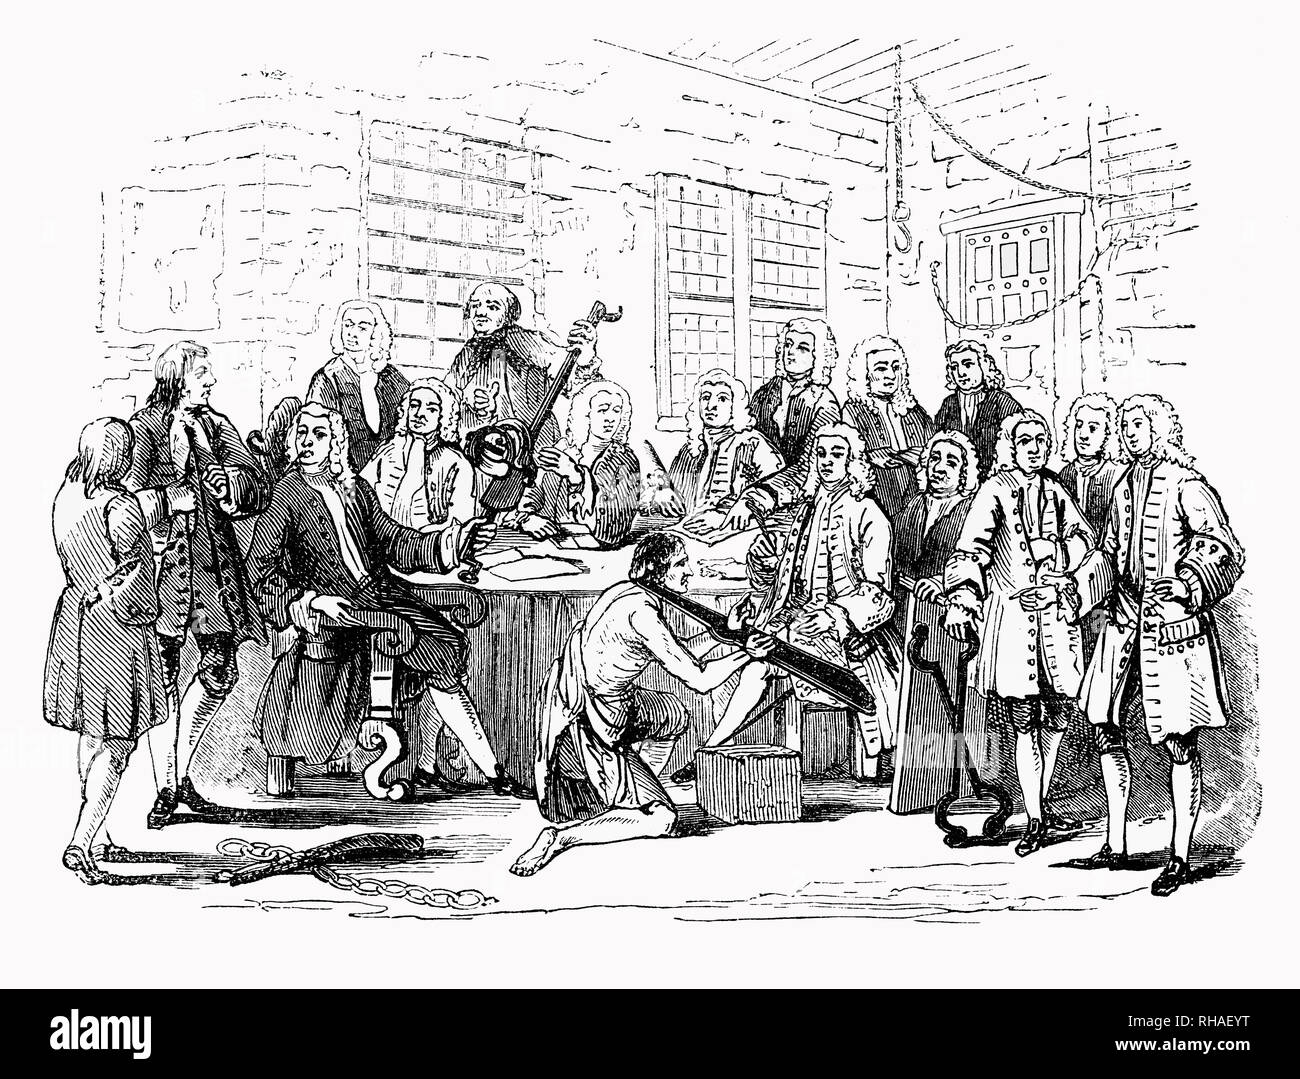 The head of the prison was termed the warden, who was appointed by letters patent. It became a frequent practice of the holder of the patent to farm out the prison to the highest bidder. One was Thomas Bambridge, who became warden in 1728 and guilty of the greatest extortions upon prisoners according to a committee of the House of Commons appointed to inquire into the state of English gaols. He destroyed prisoners for debt and treated them in the most barbarous and cruel manner, in high violation and contempt of the laws. He was committed to Newgate Prison, and prevented taking office. Stock Photo